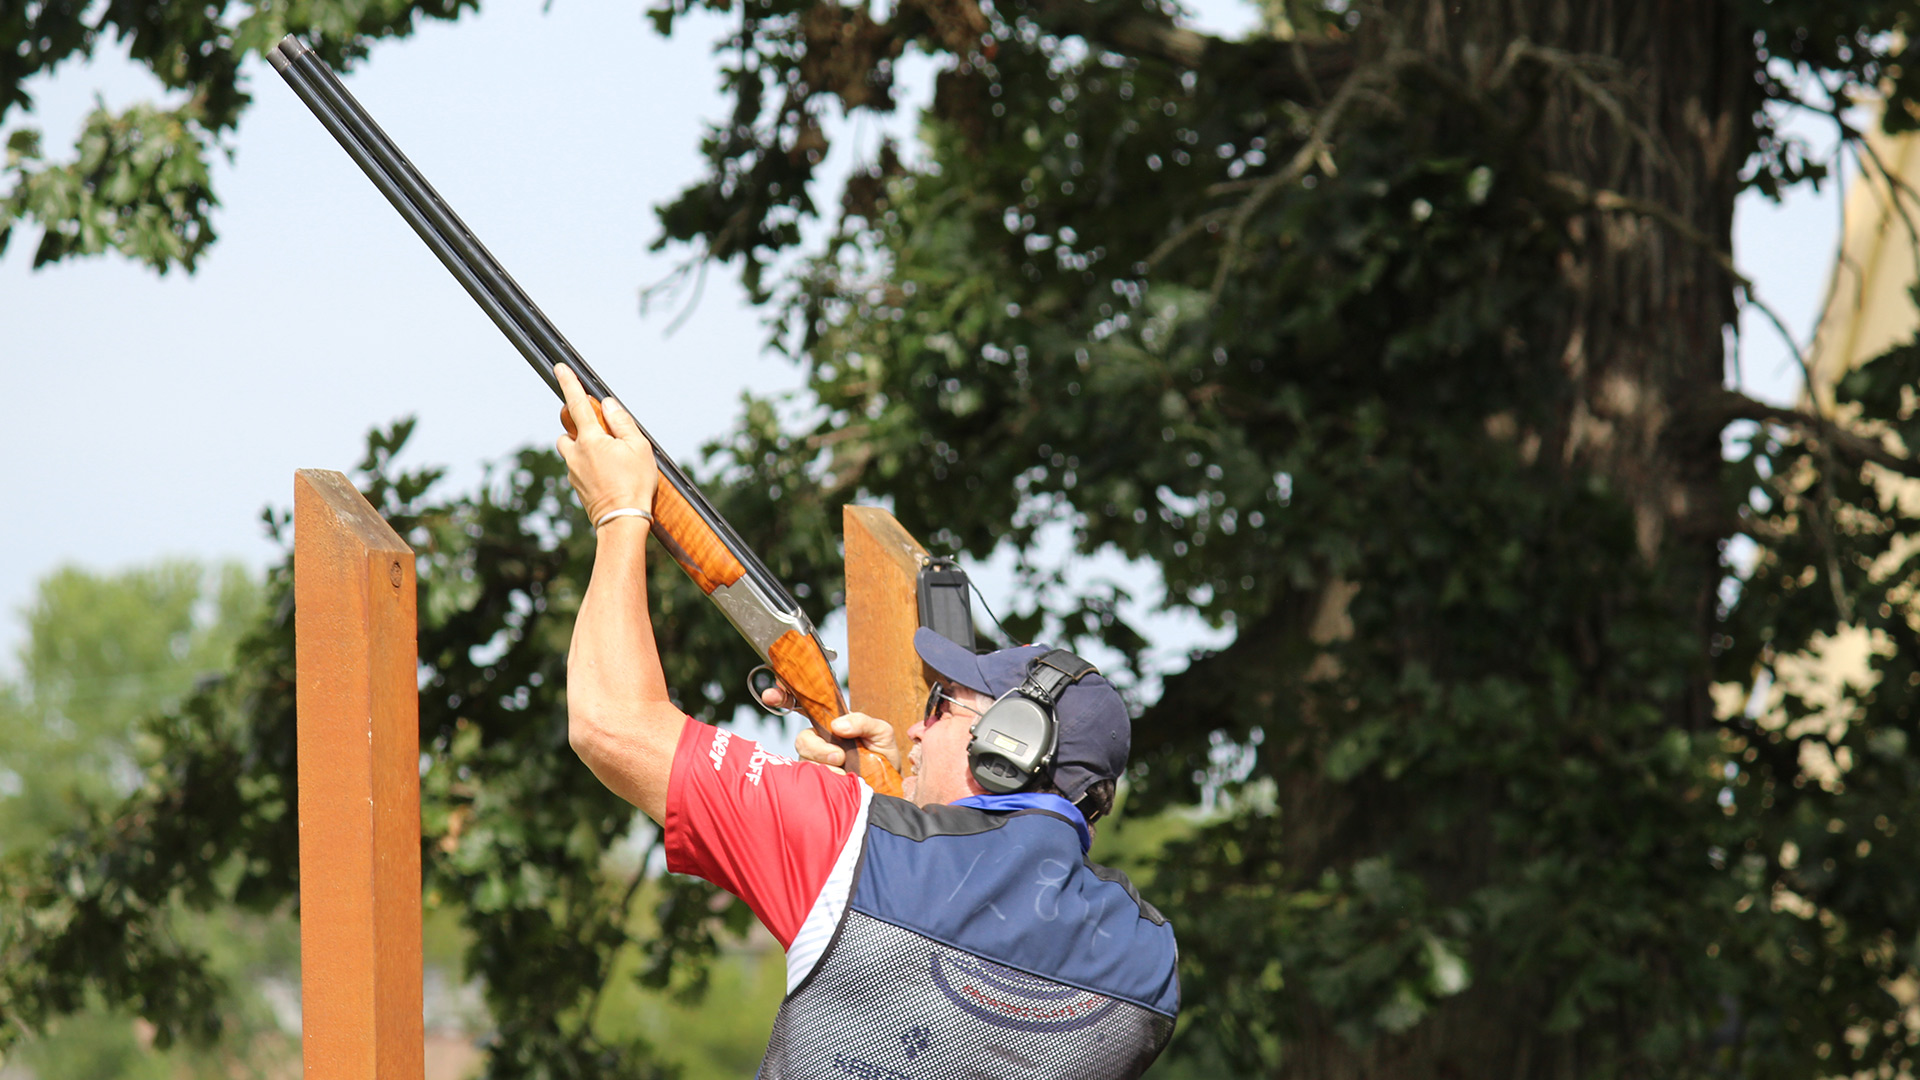 Andy Duffy, Sporting Clays